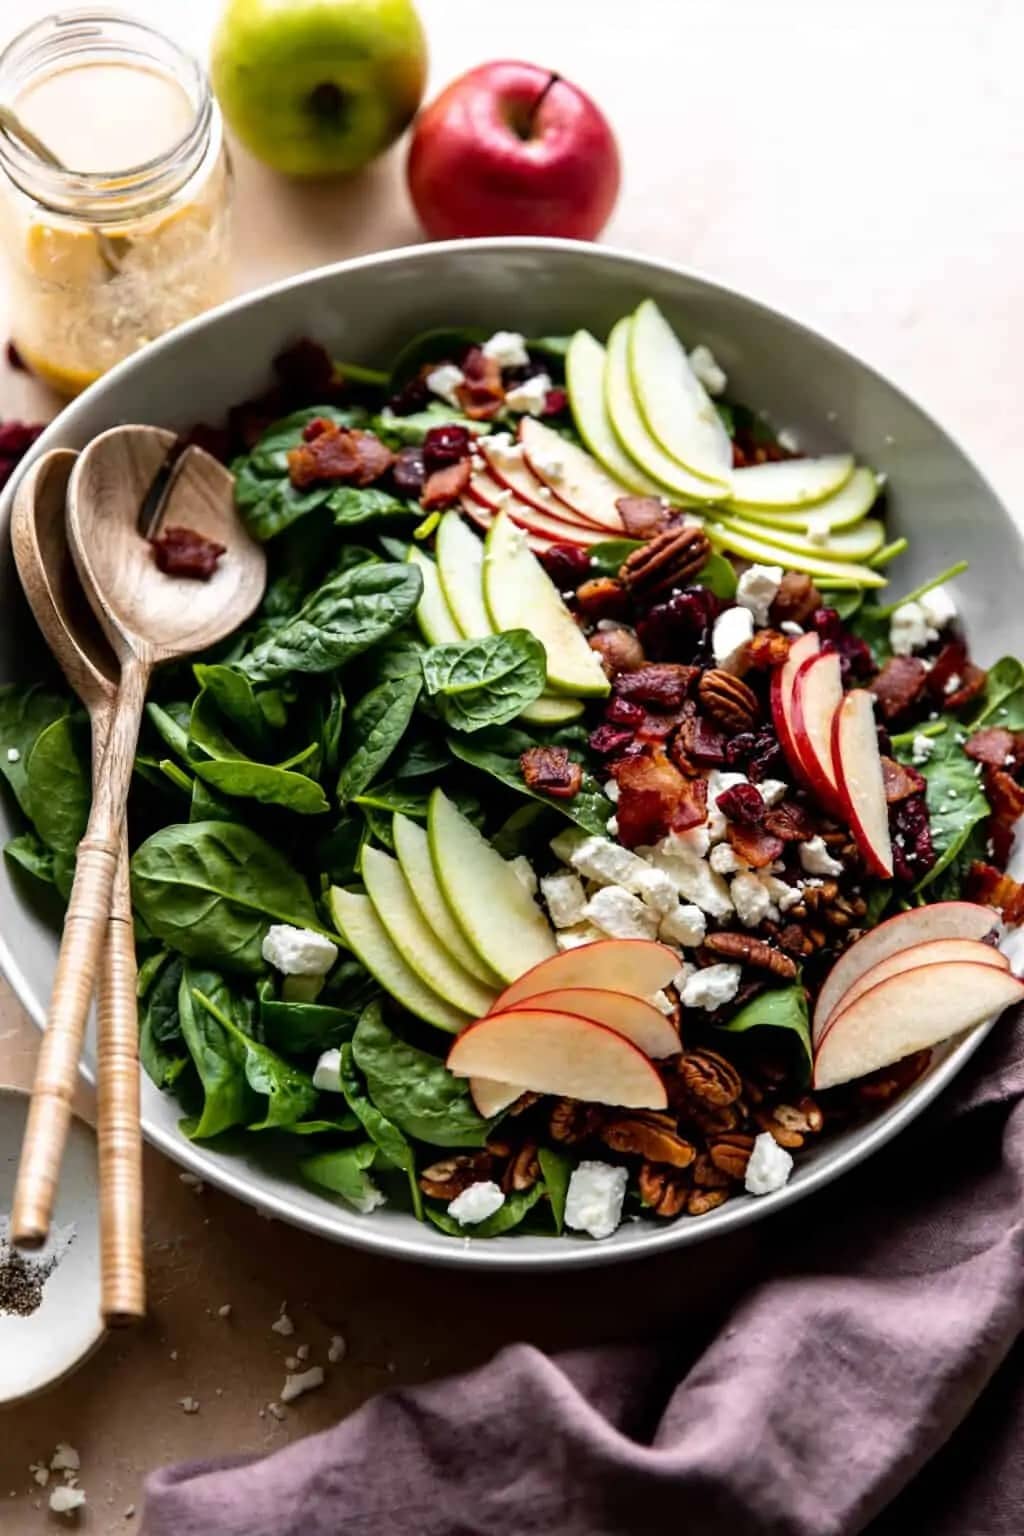 Autumn apple salad made with pecans, cranberries, apples, feta and baby spinach layered on top of fresh spinach.